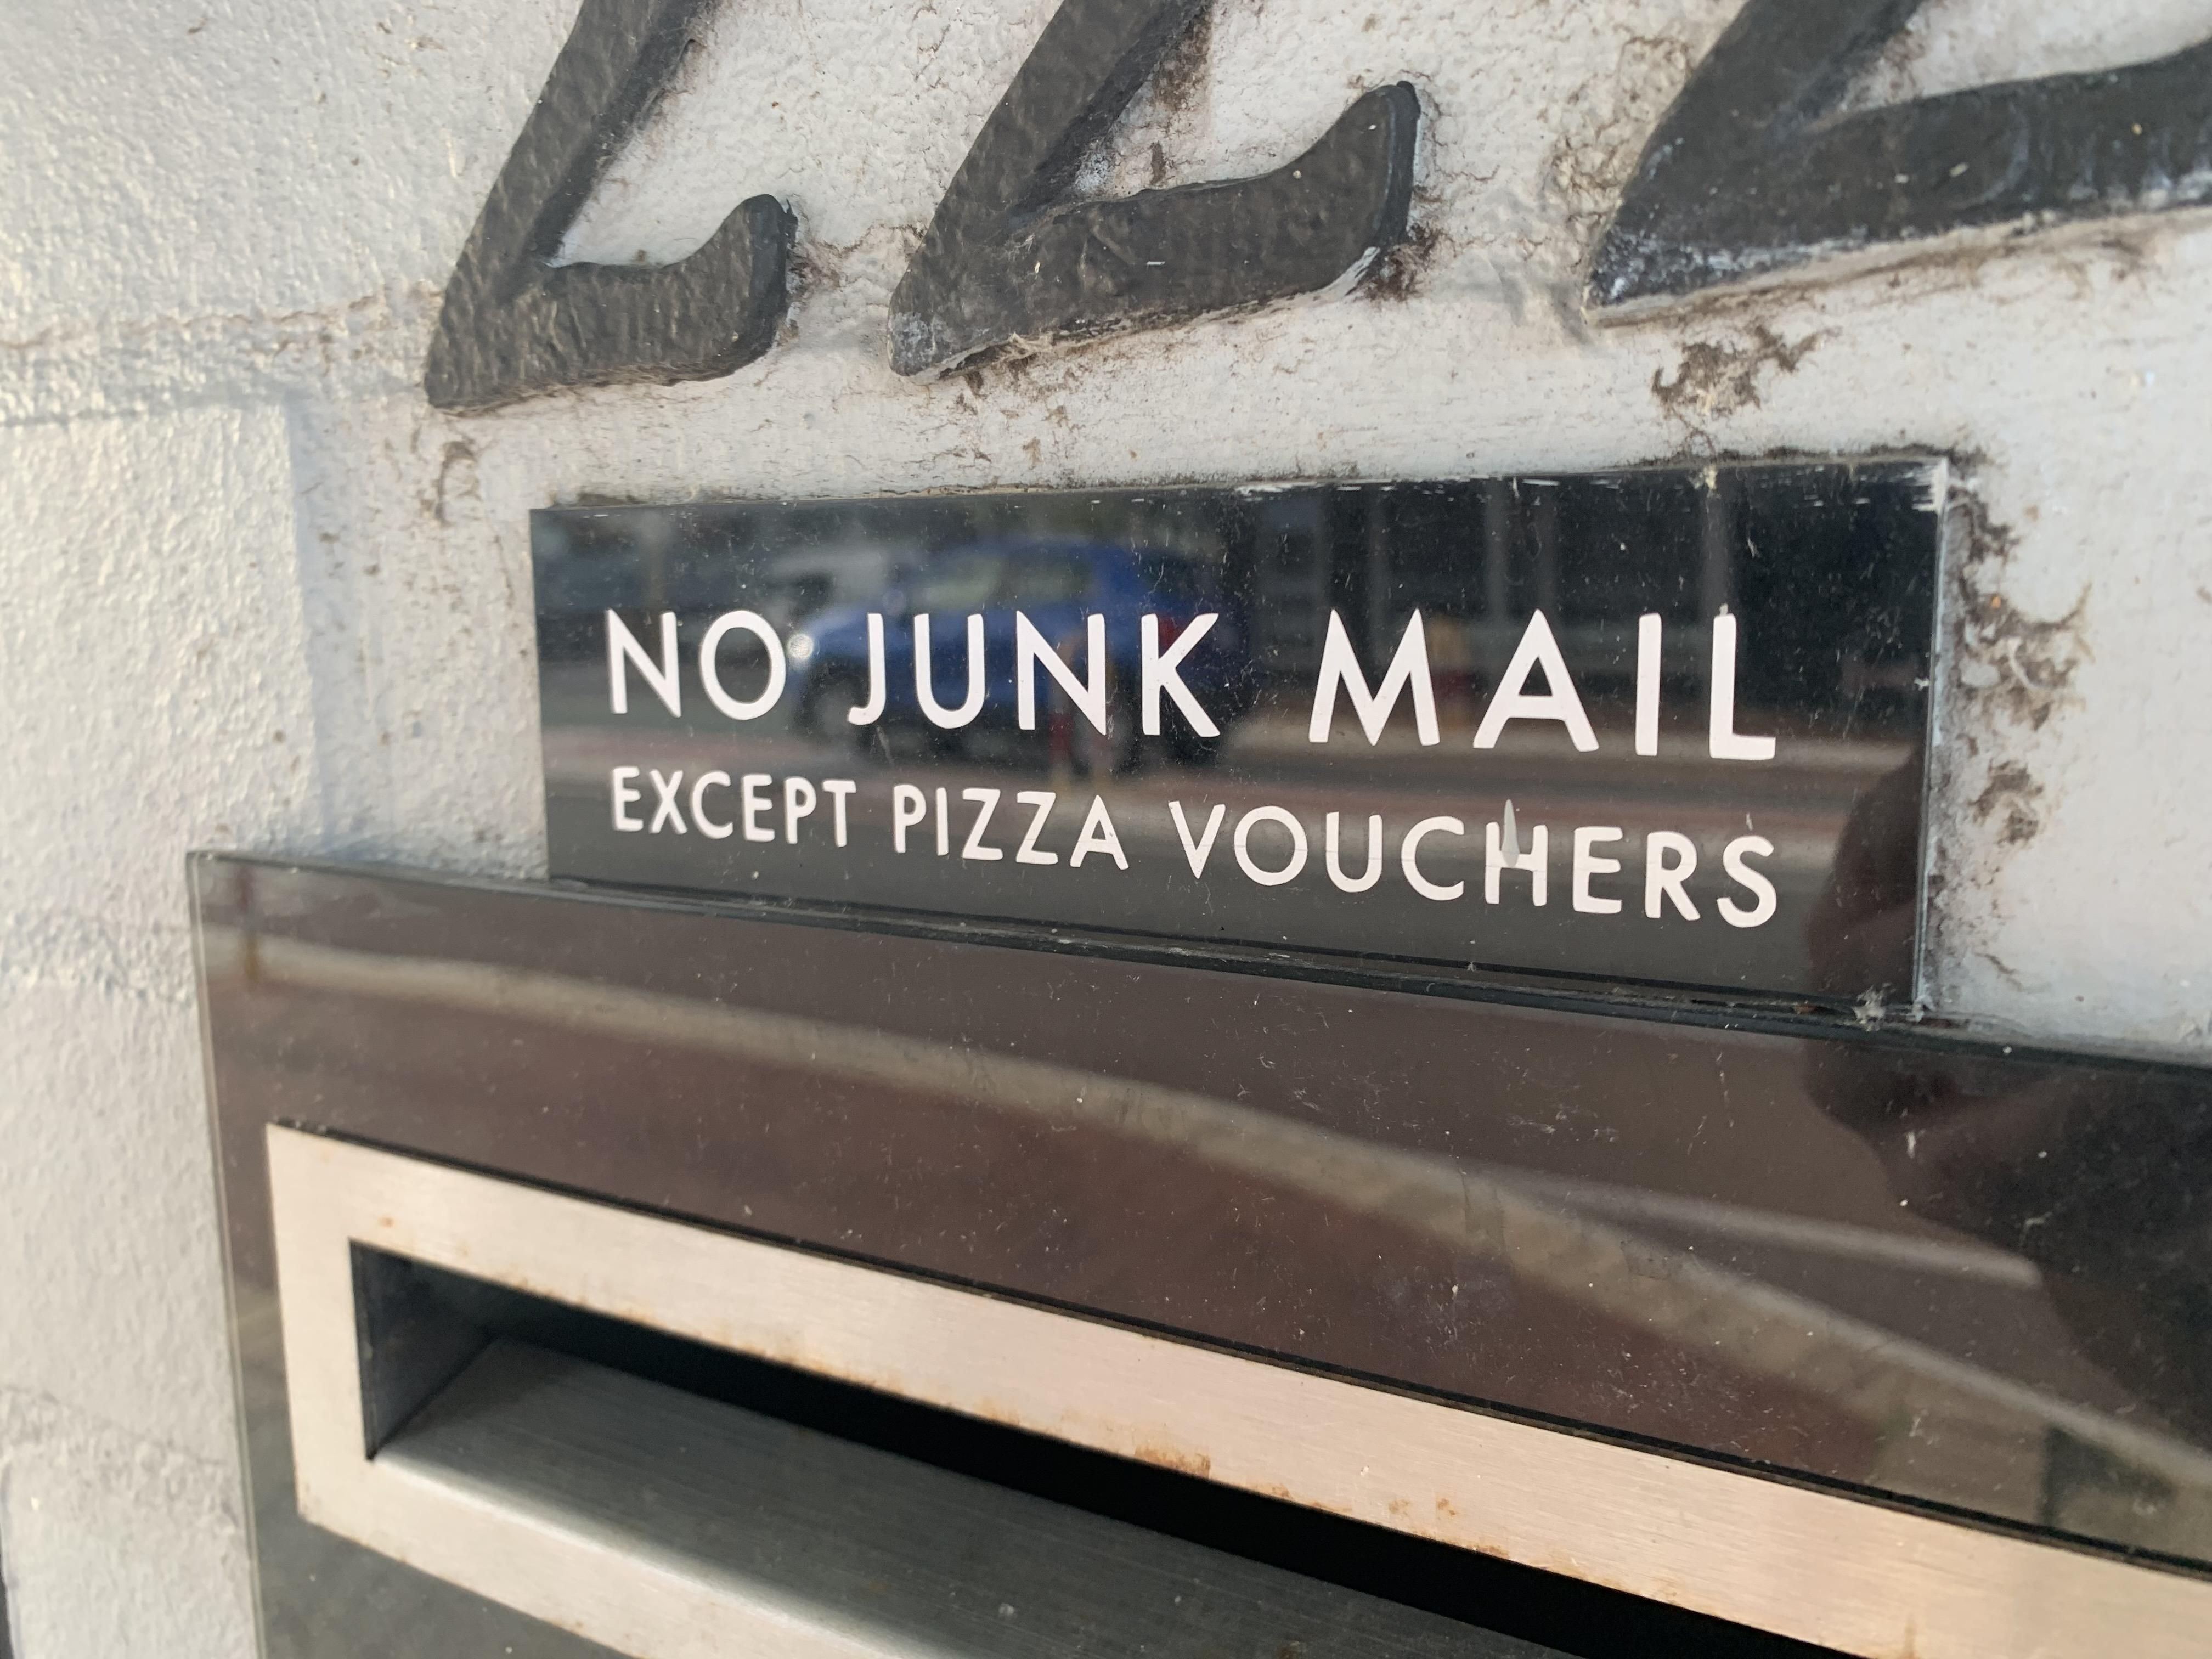 We all need pizza vouchers